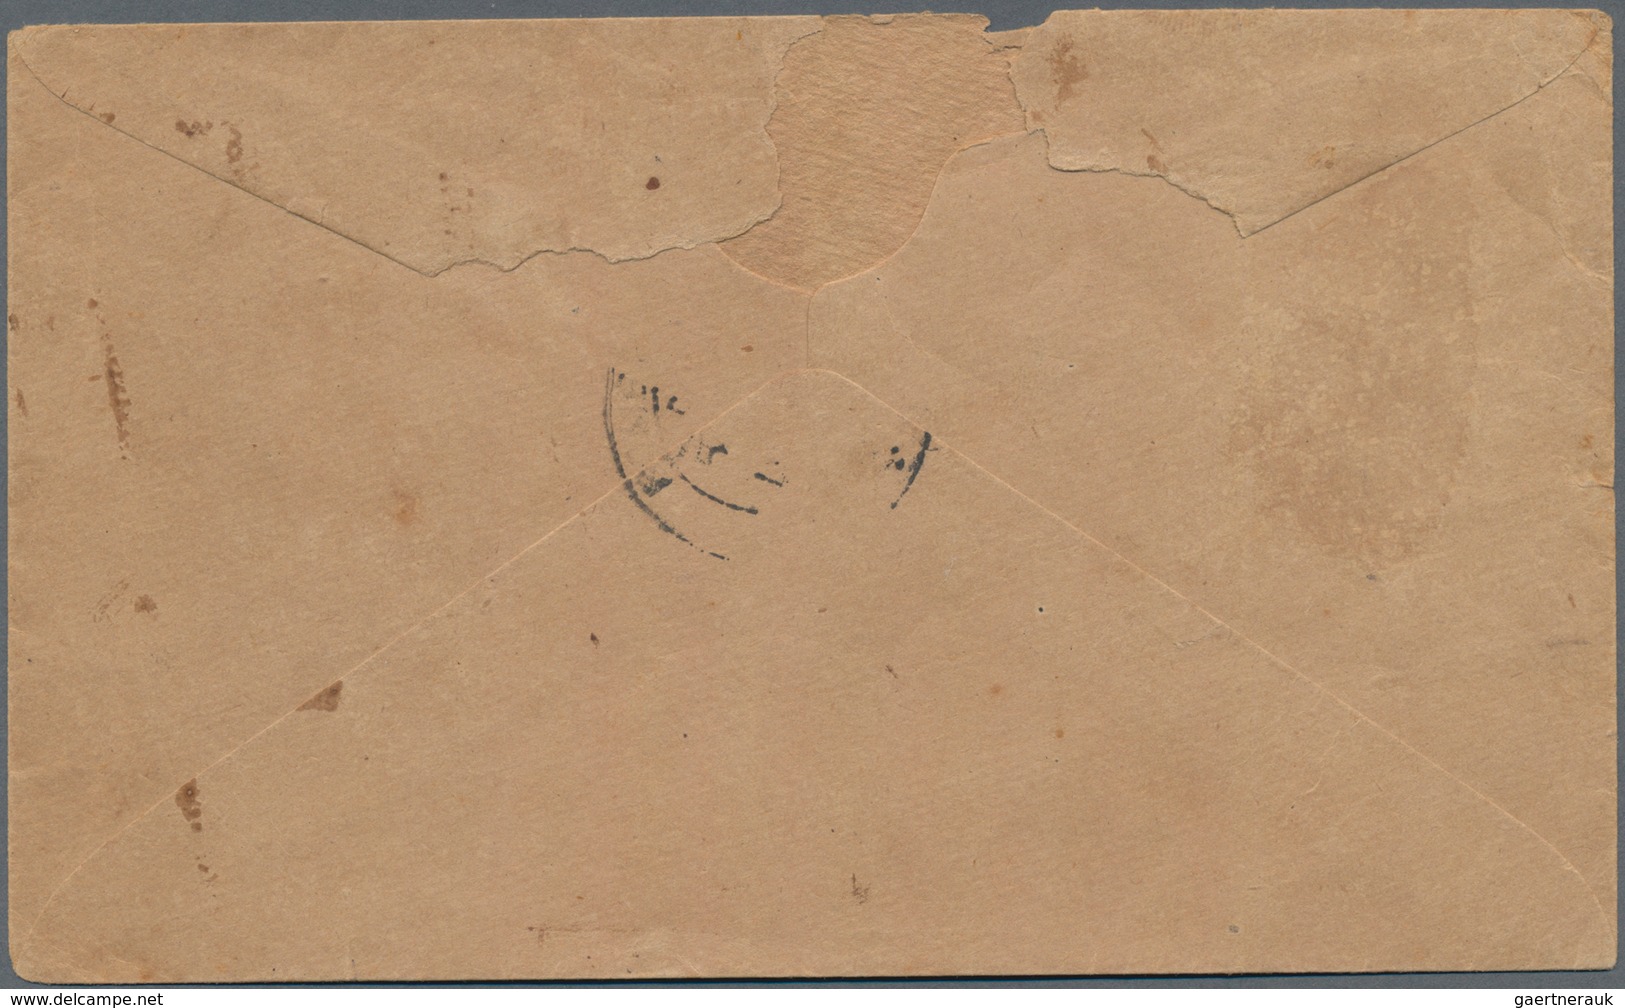 Indien - Feldpost: 1918 I.E.F.: Cover From The Indian F.P.O. 84 In Nasiriya, IRAQ To Bombay, Franked - Militaire Vrijstelling Van Portkosten